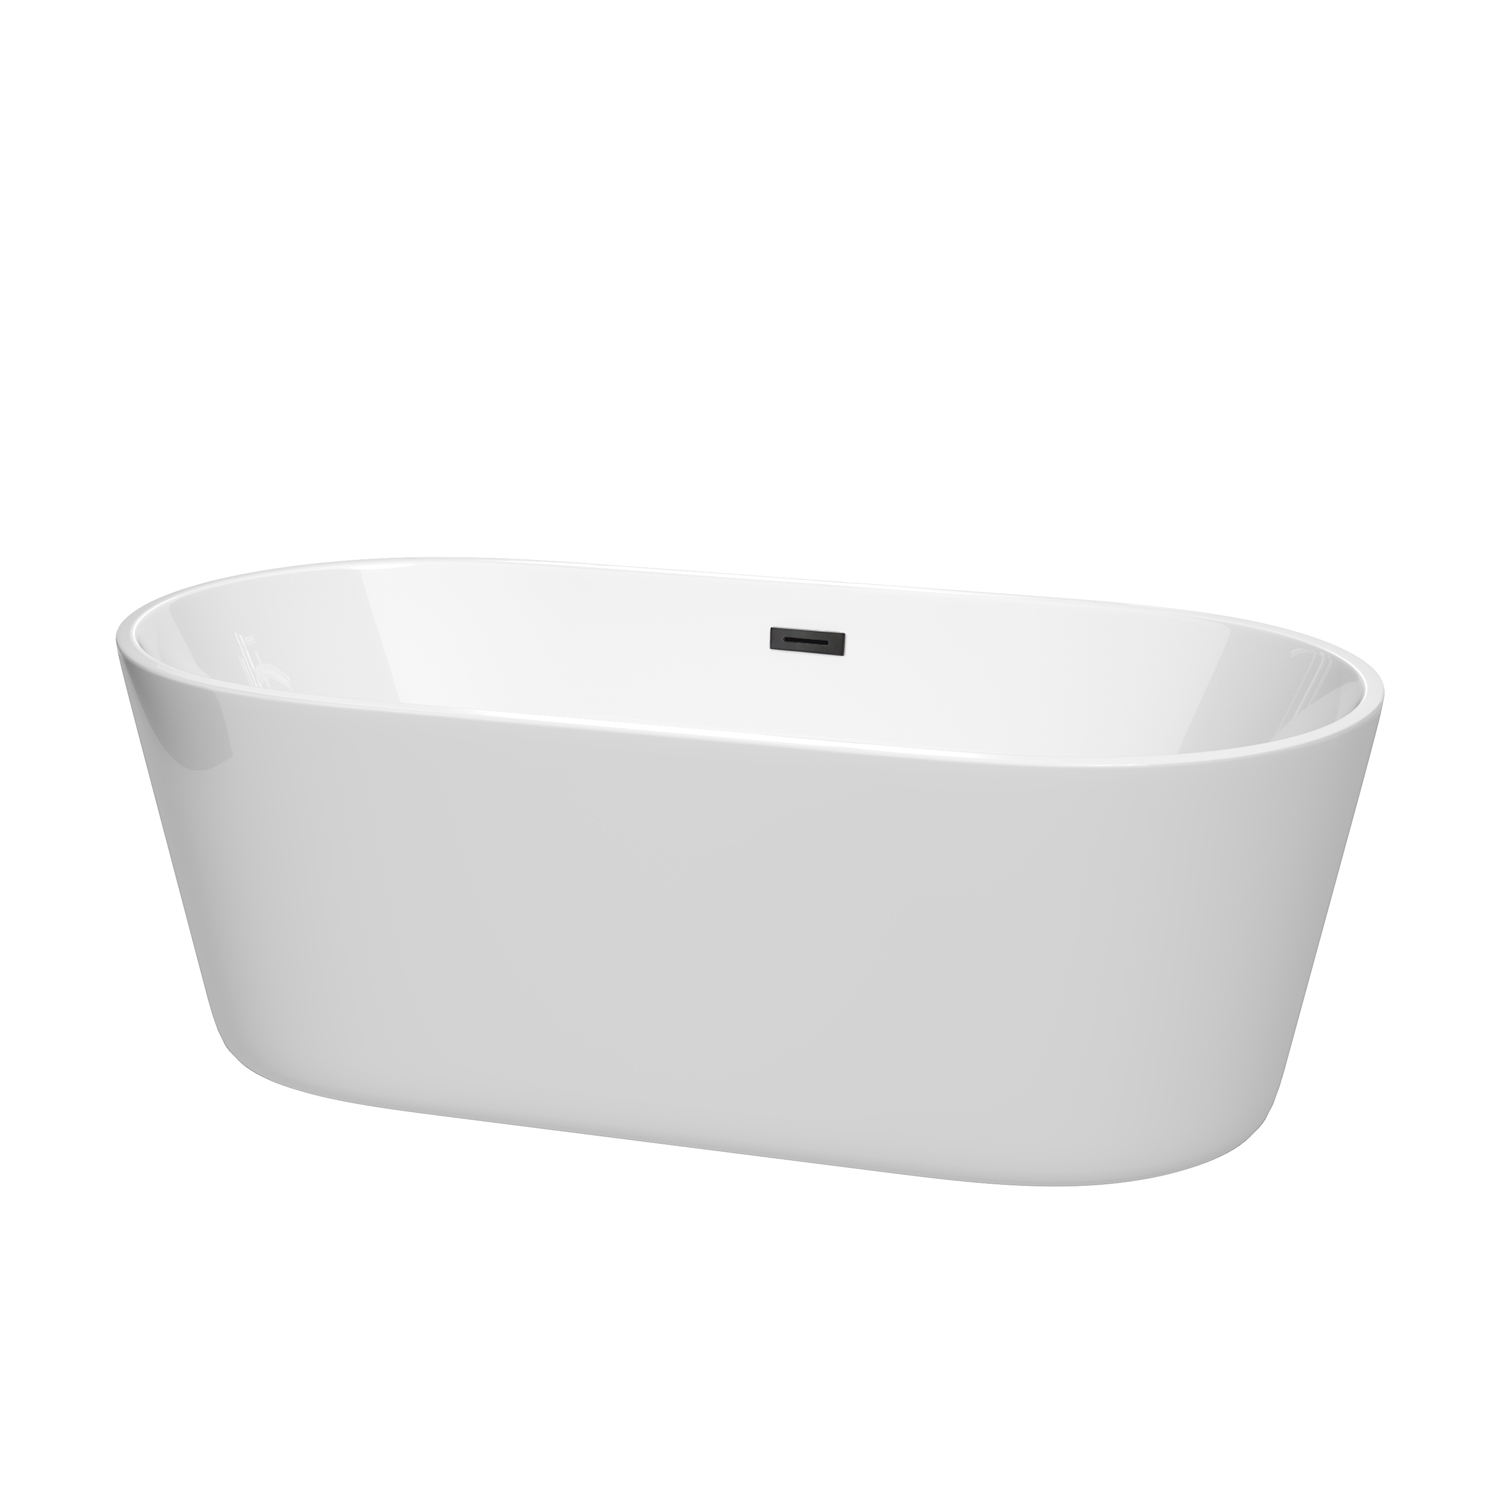 67" Freestanding Bathtub in White with Matte Black Drain and Overflow Trim